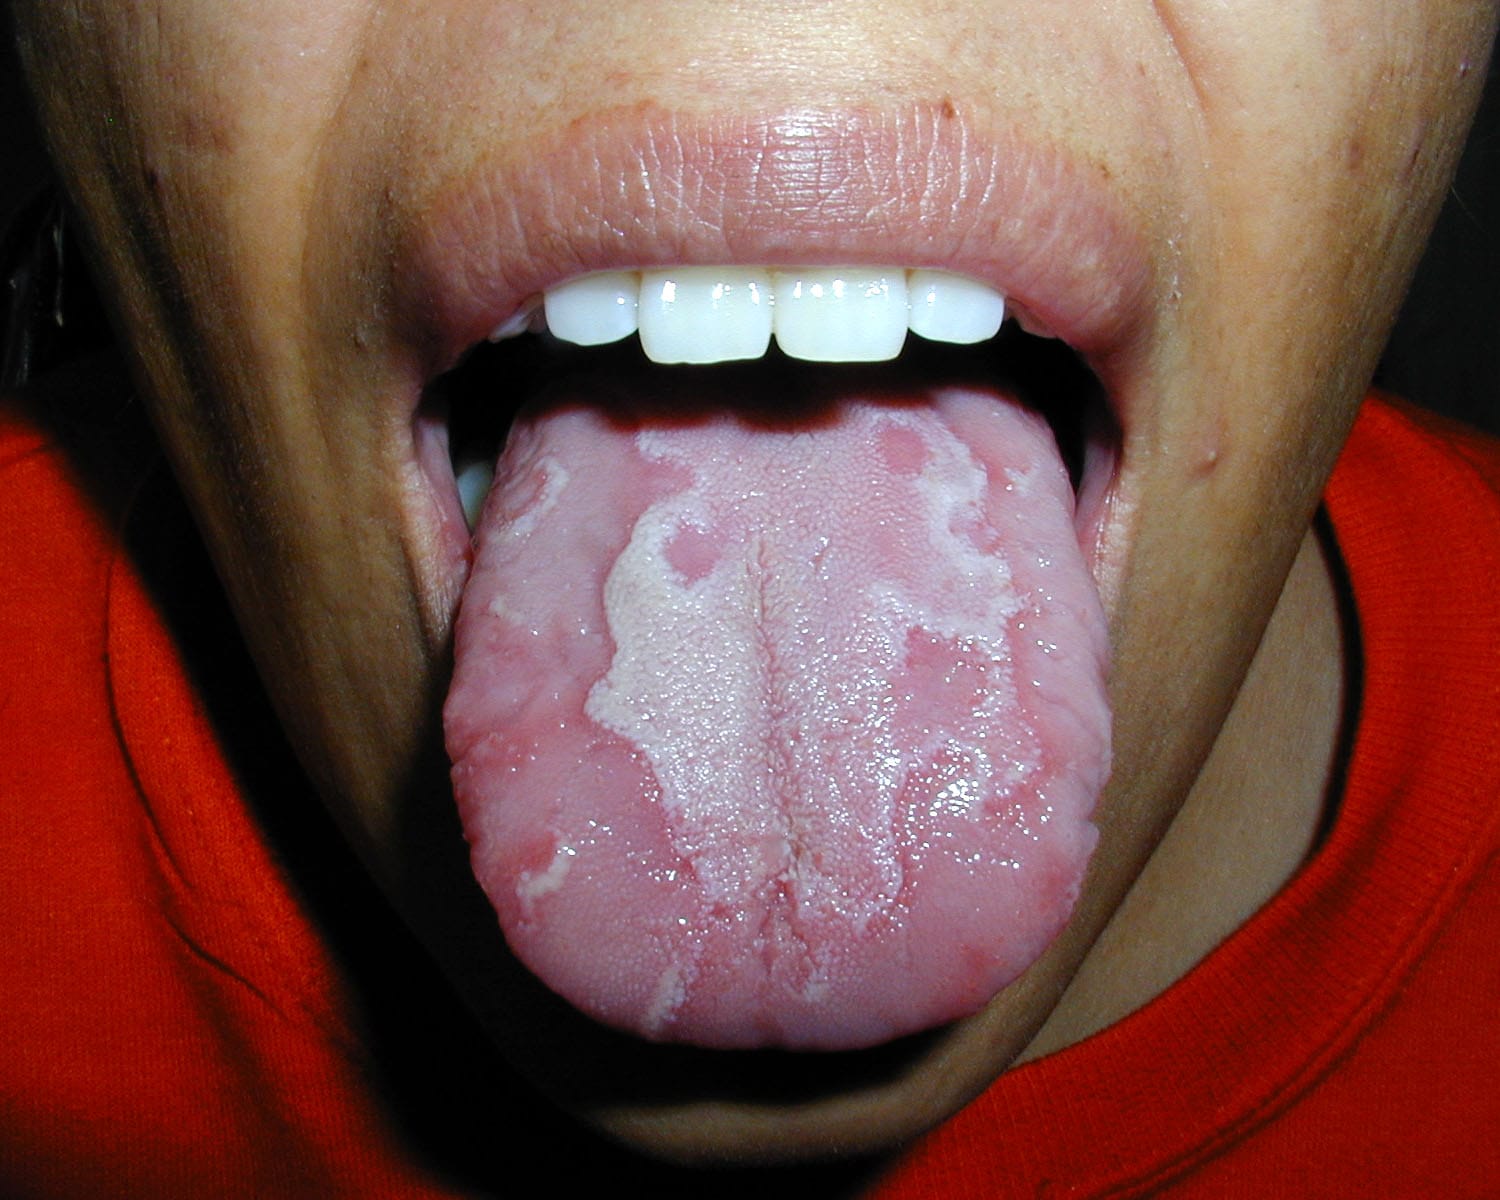  tongue) is made by the appearance. The portions of the tongue with title=